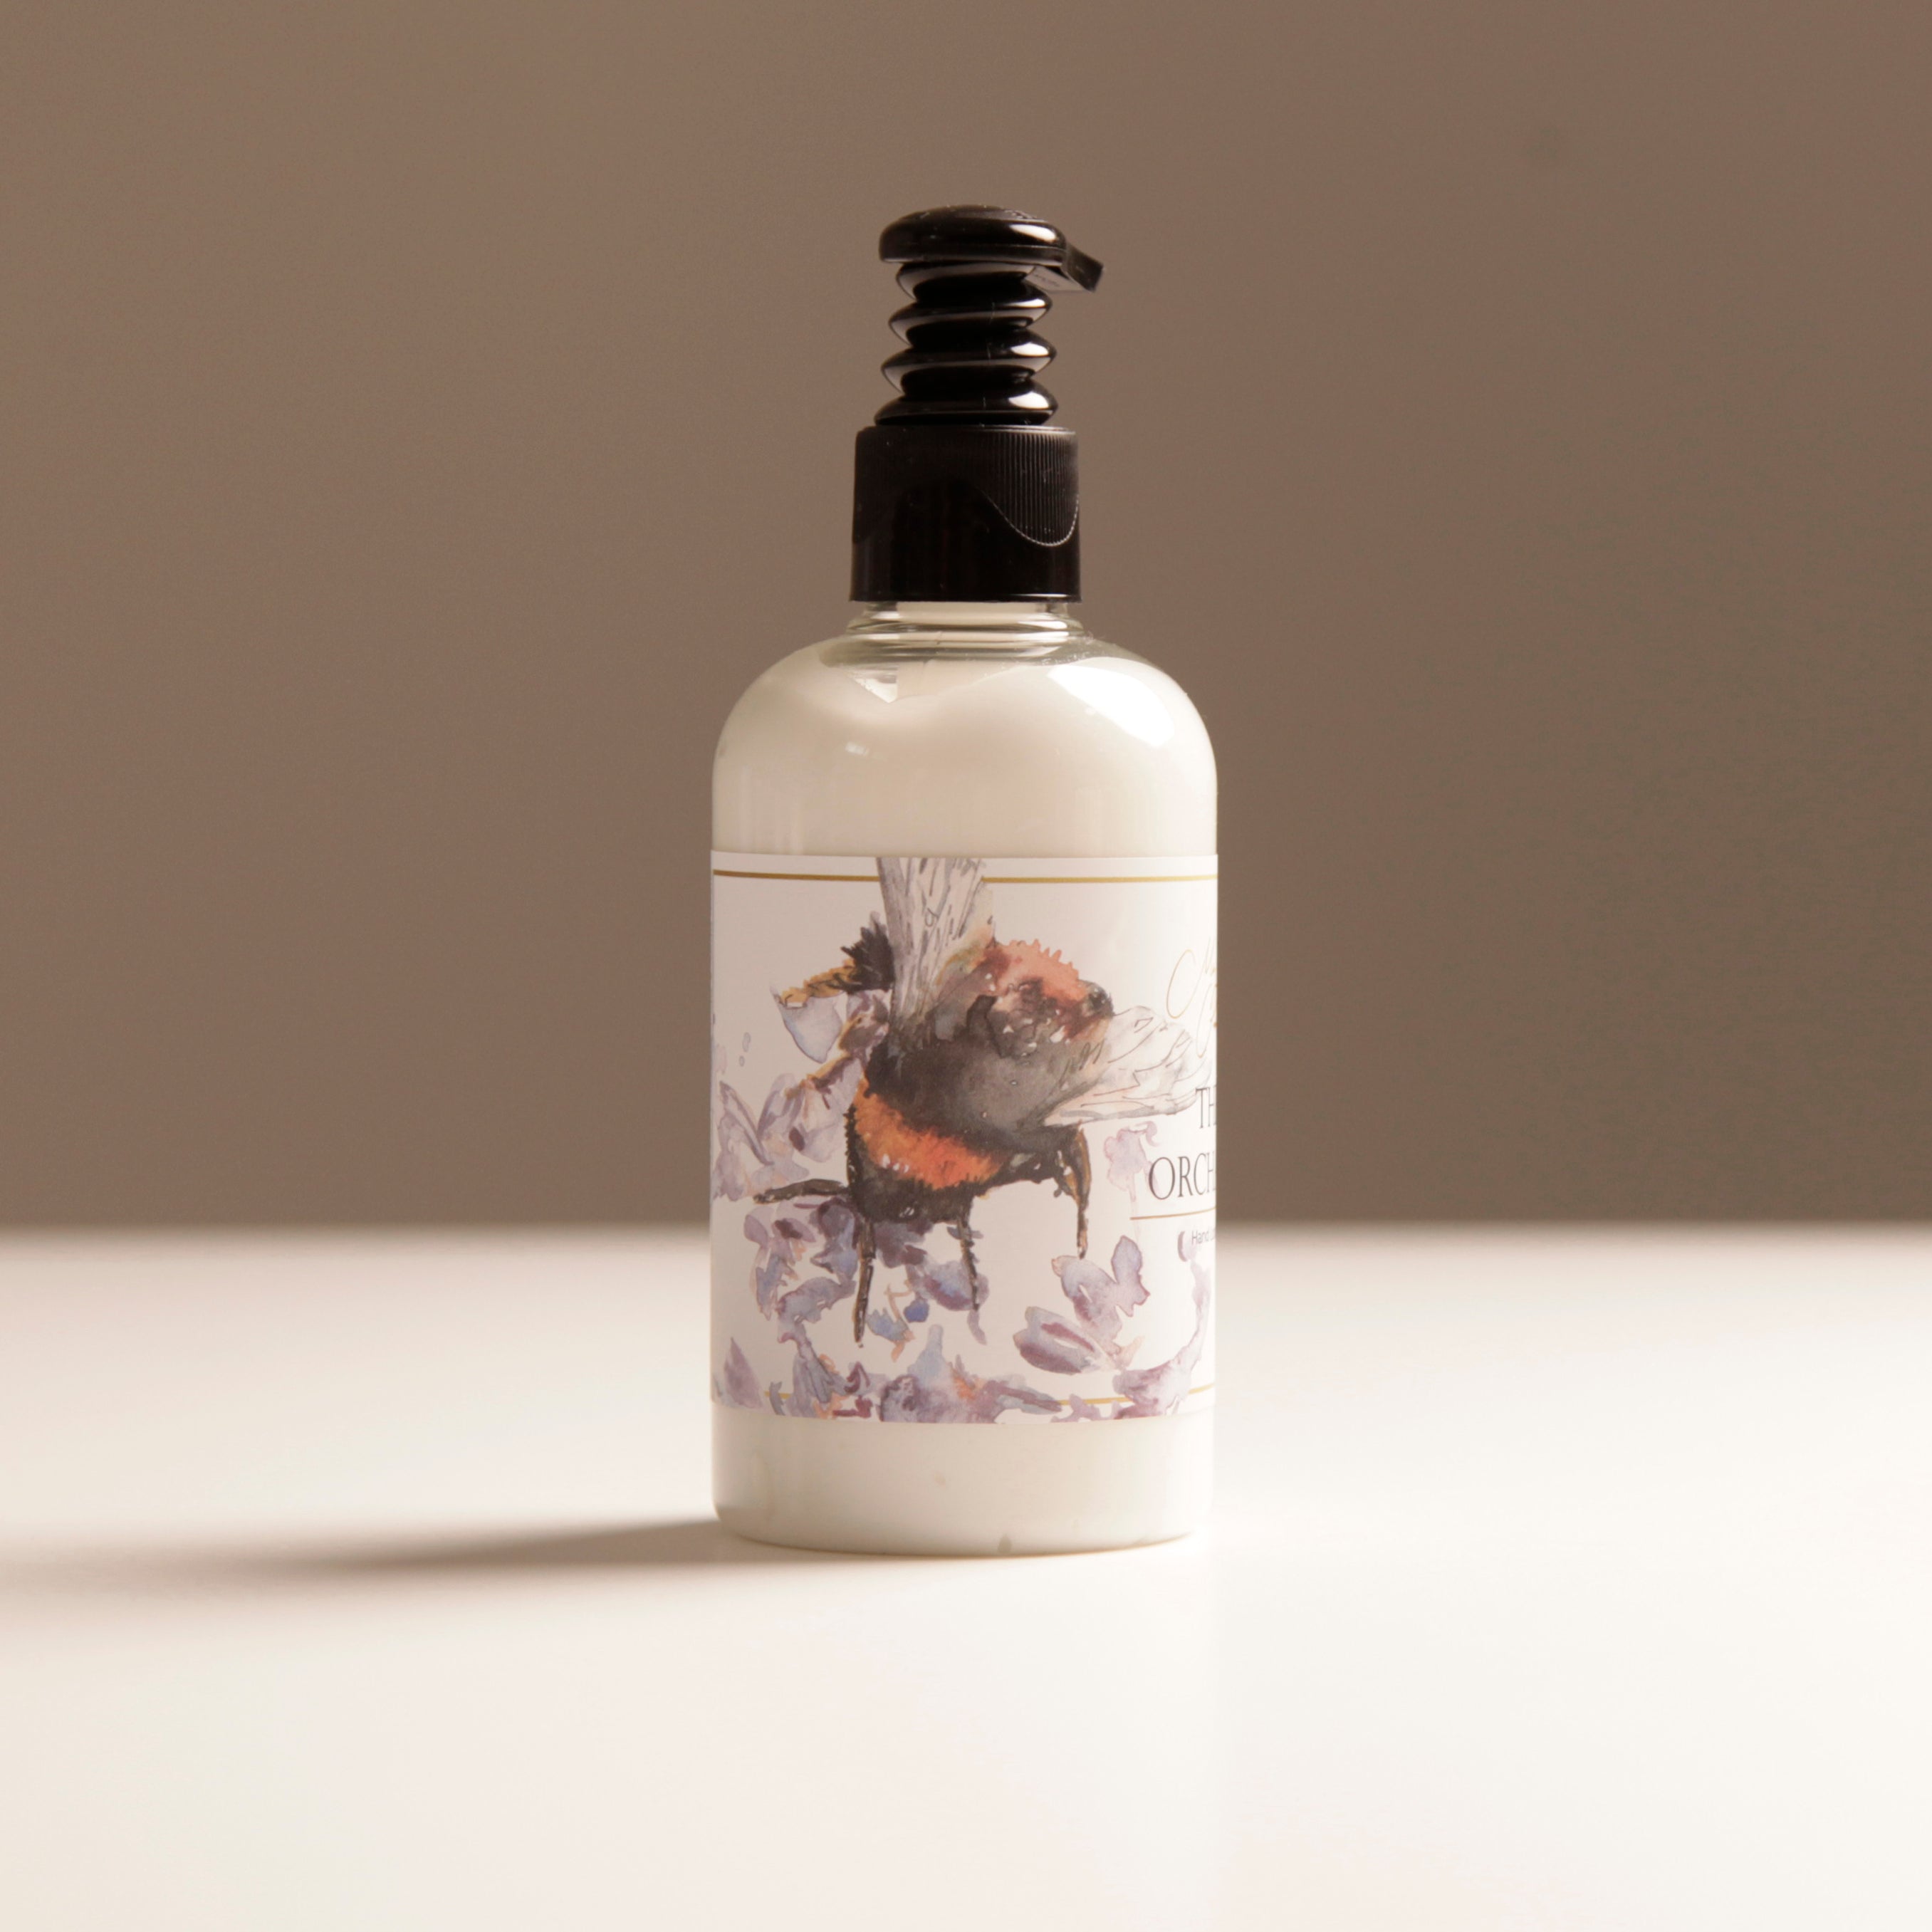 The Orchard Hand Lotion with Bee Design